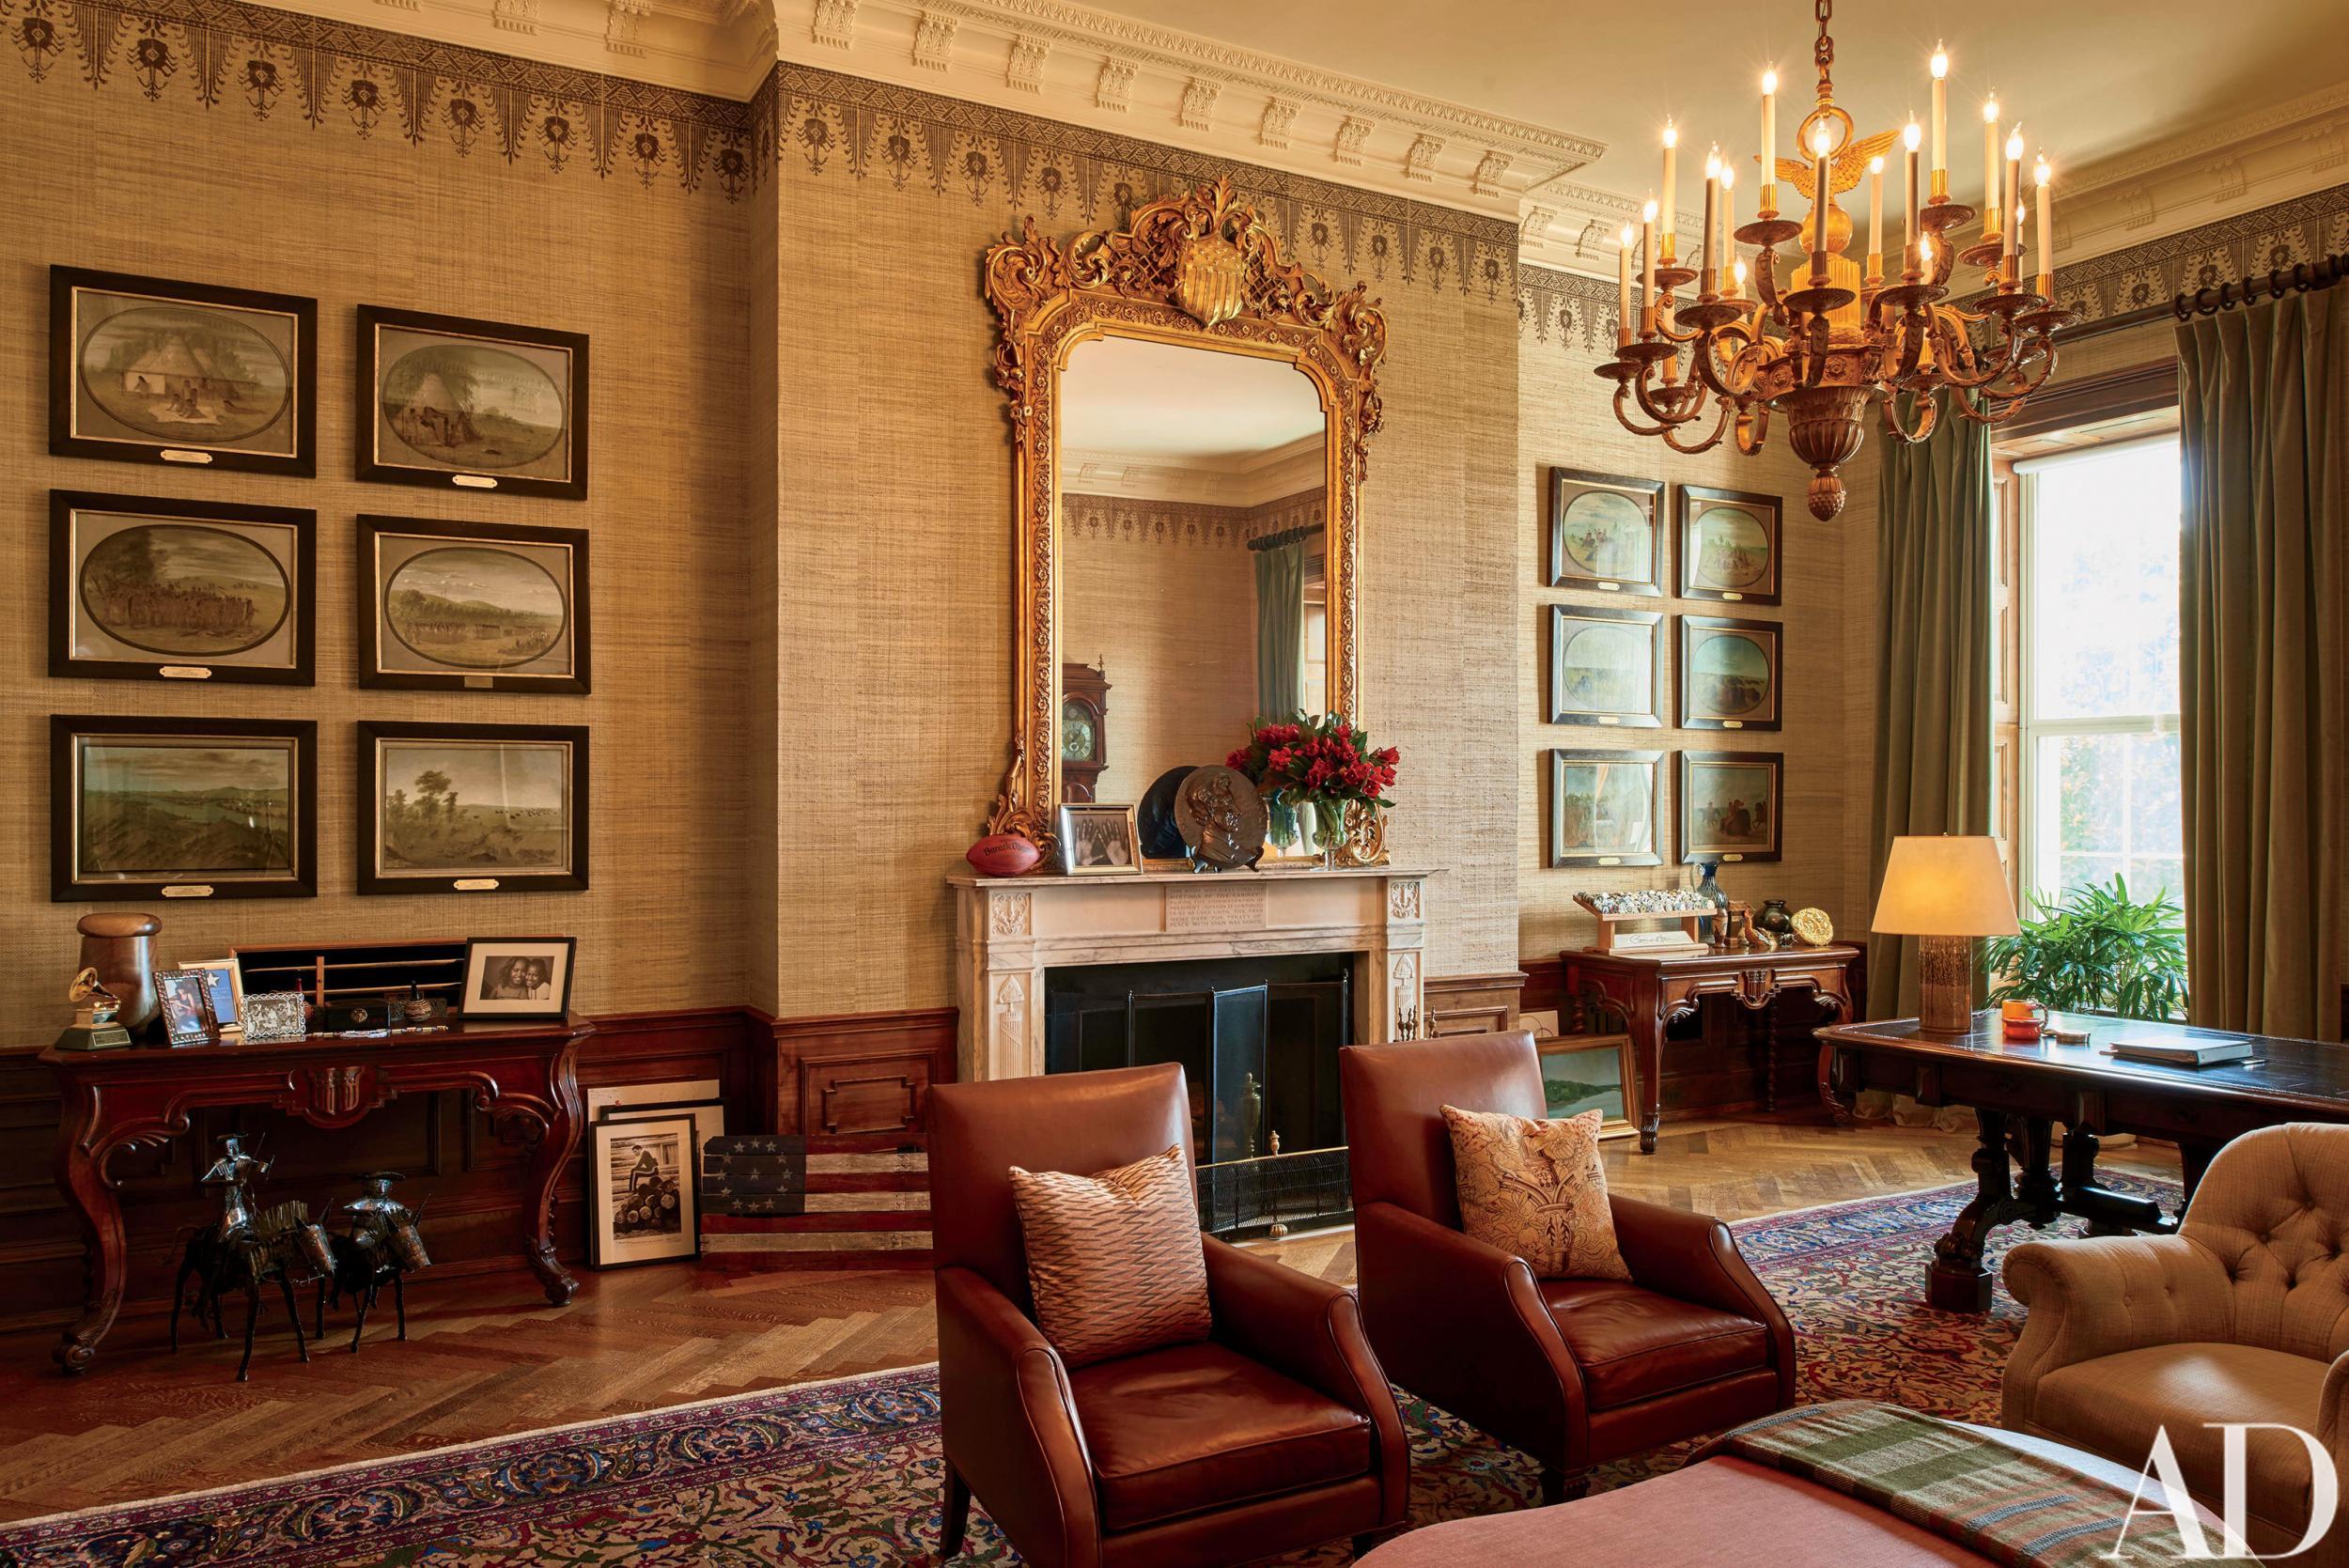 New book shares insight into decorating Obama White House (Michael Mundy)